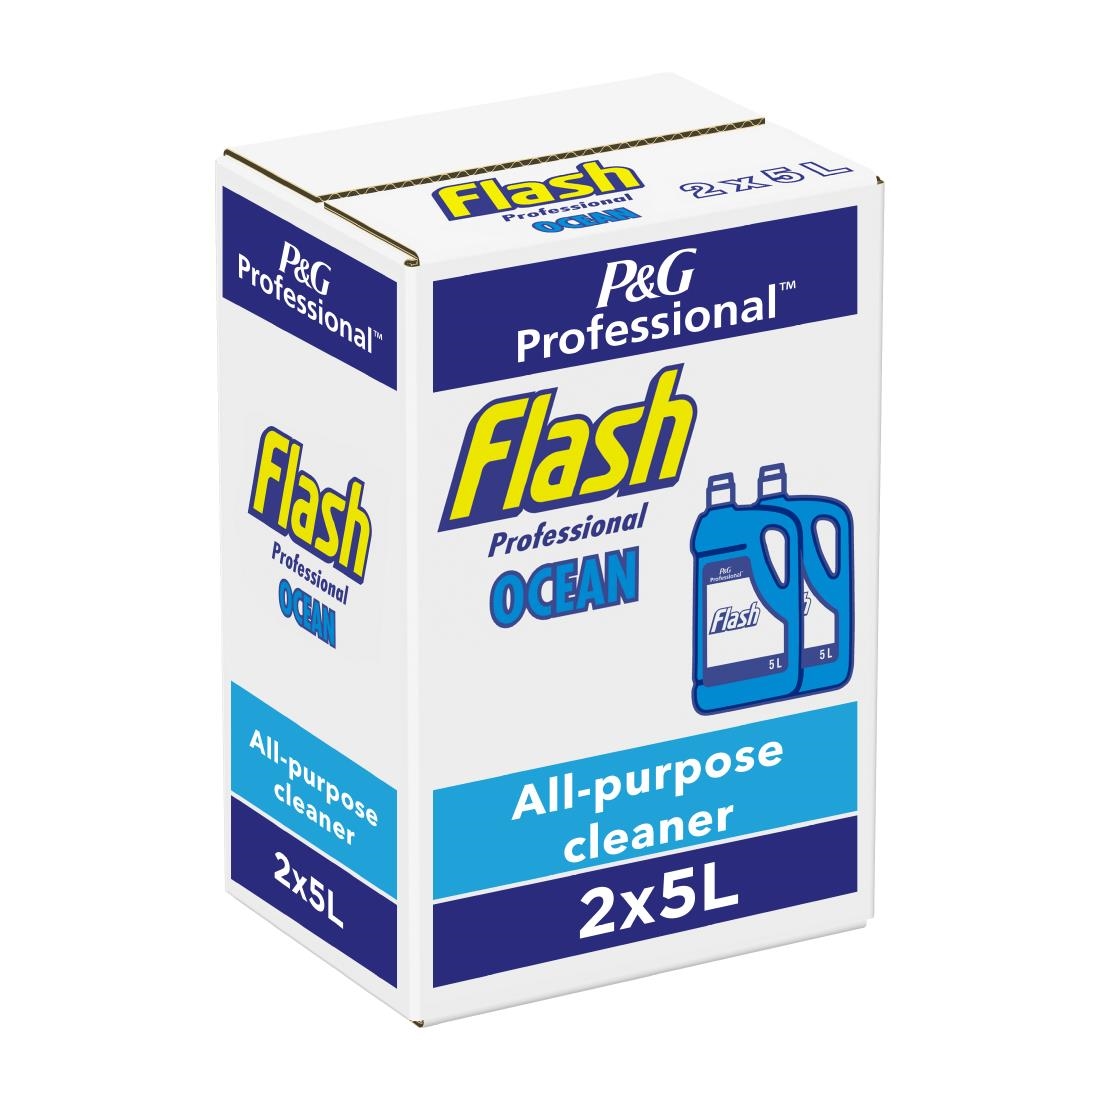 Flash Professional All-Purpose Cleaner Ocean Pack of 2 x 5Ltr (DX550)